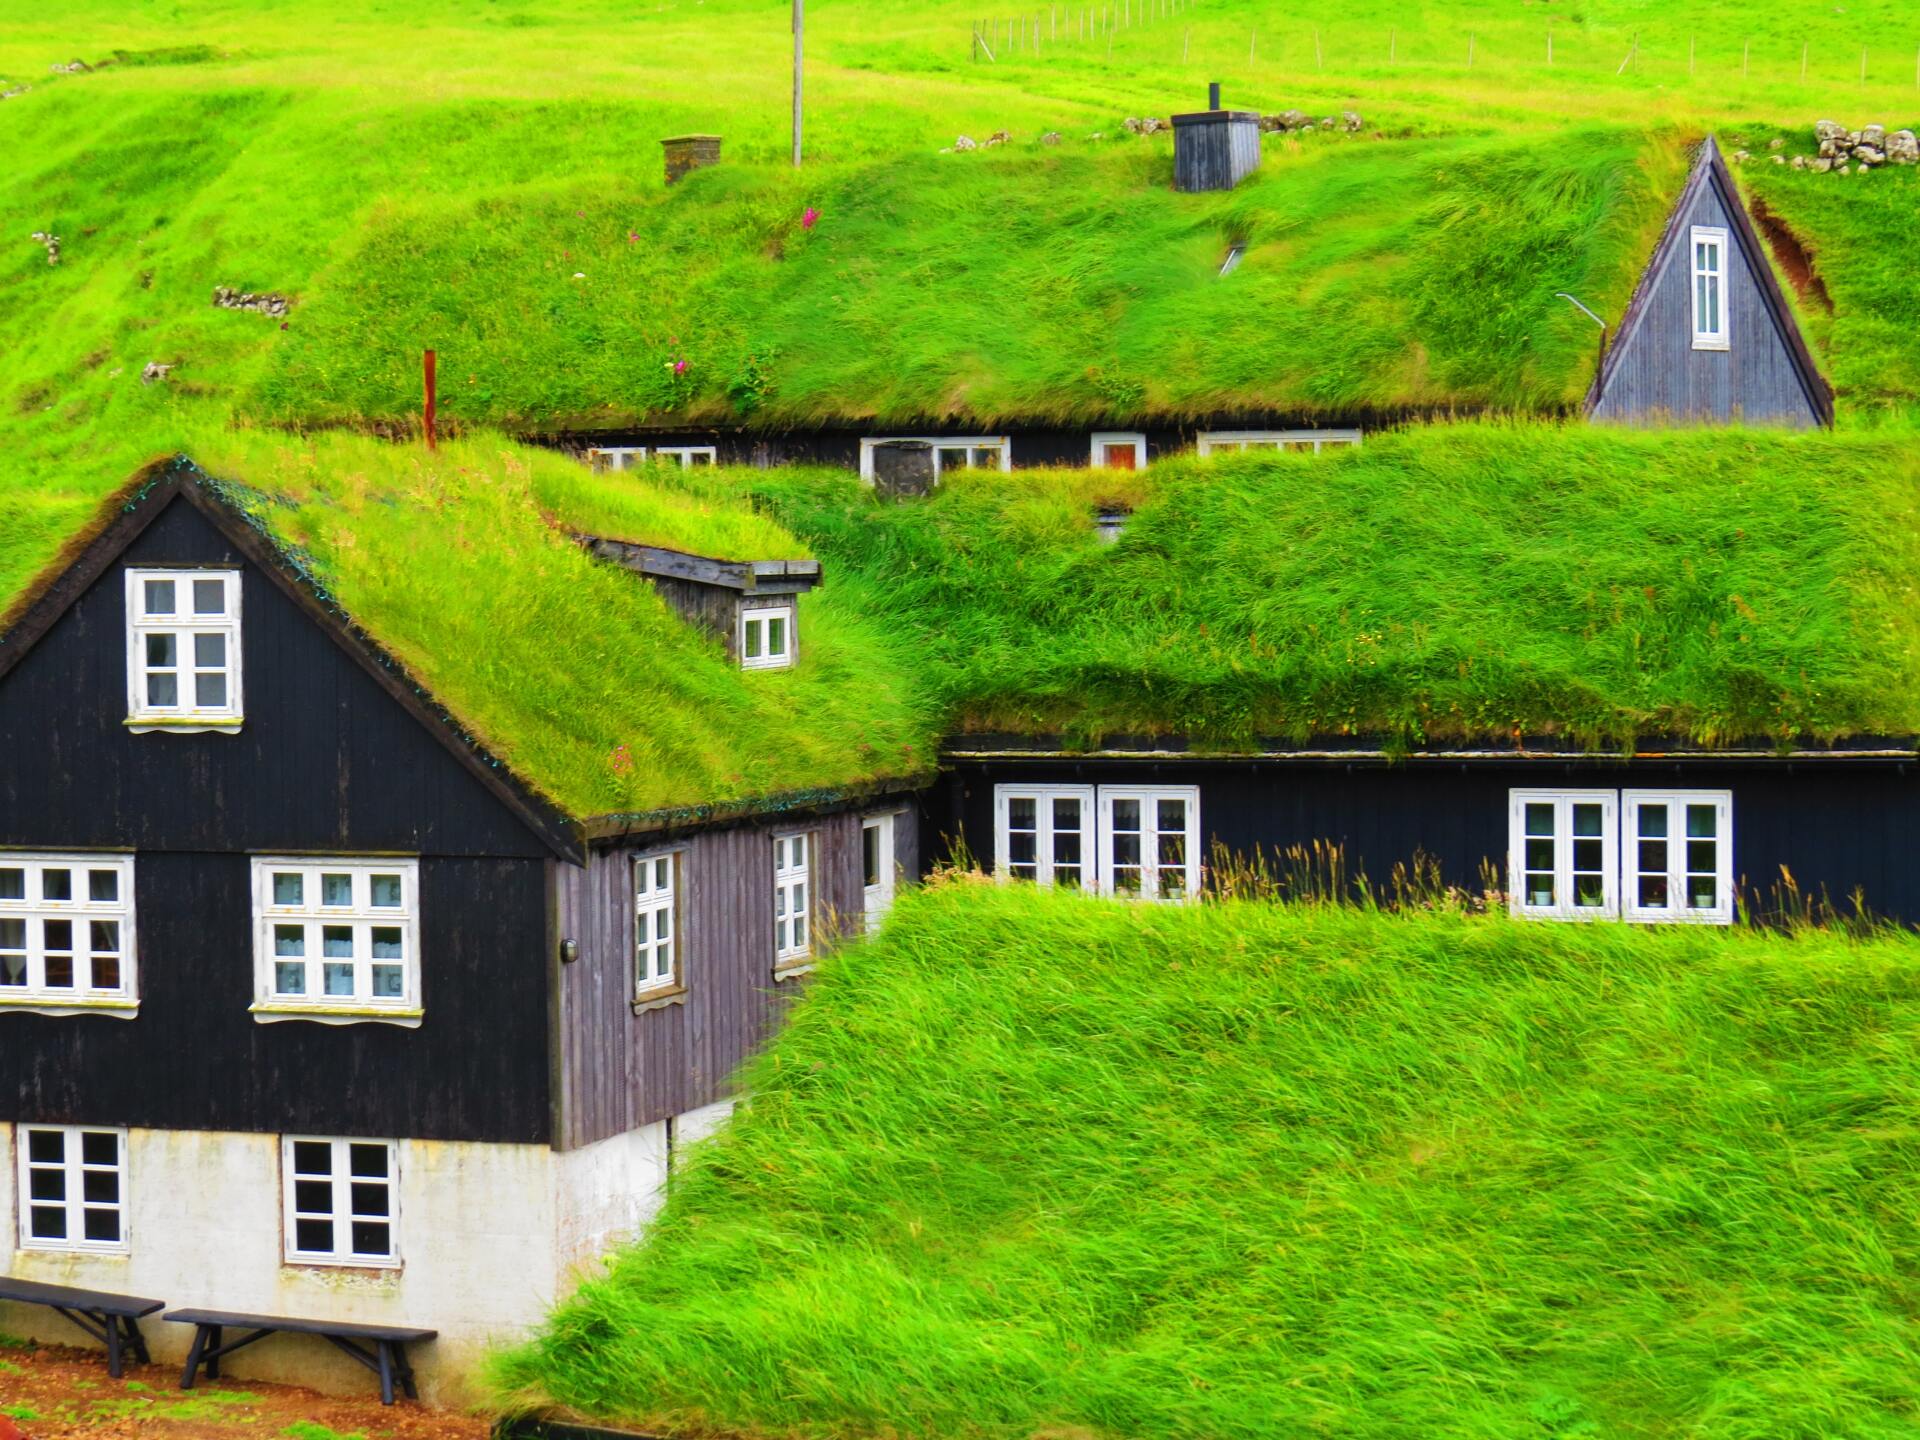 A green roof in Iceland